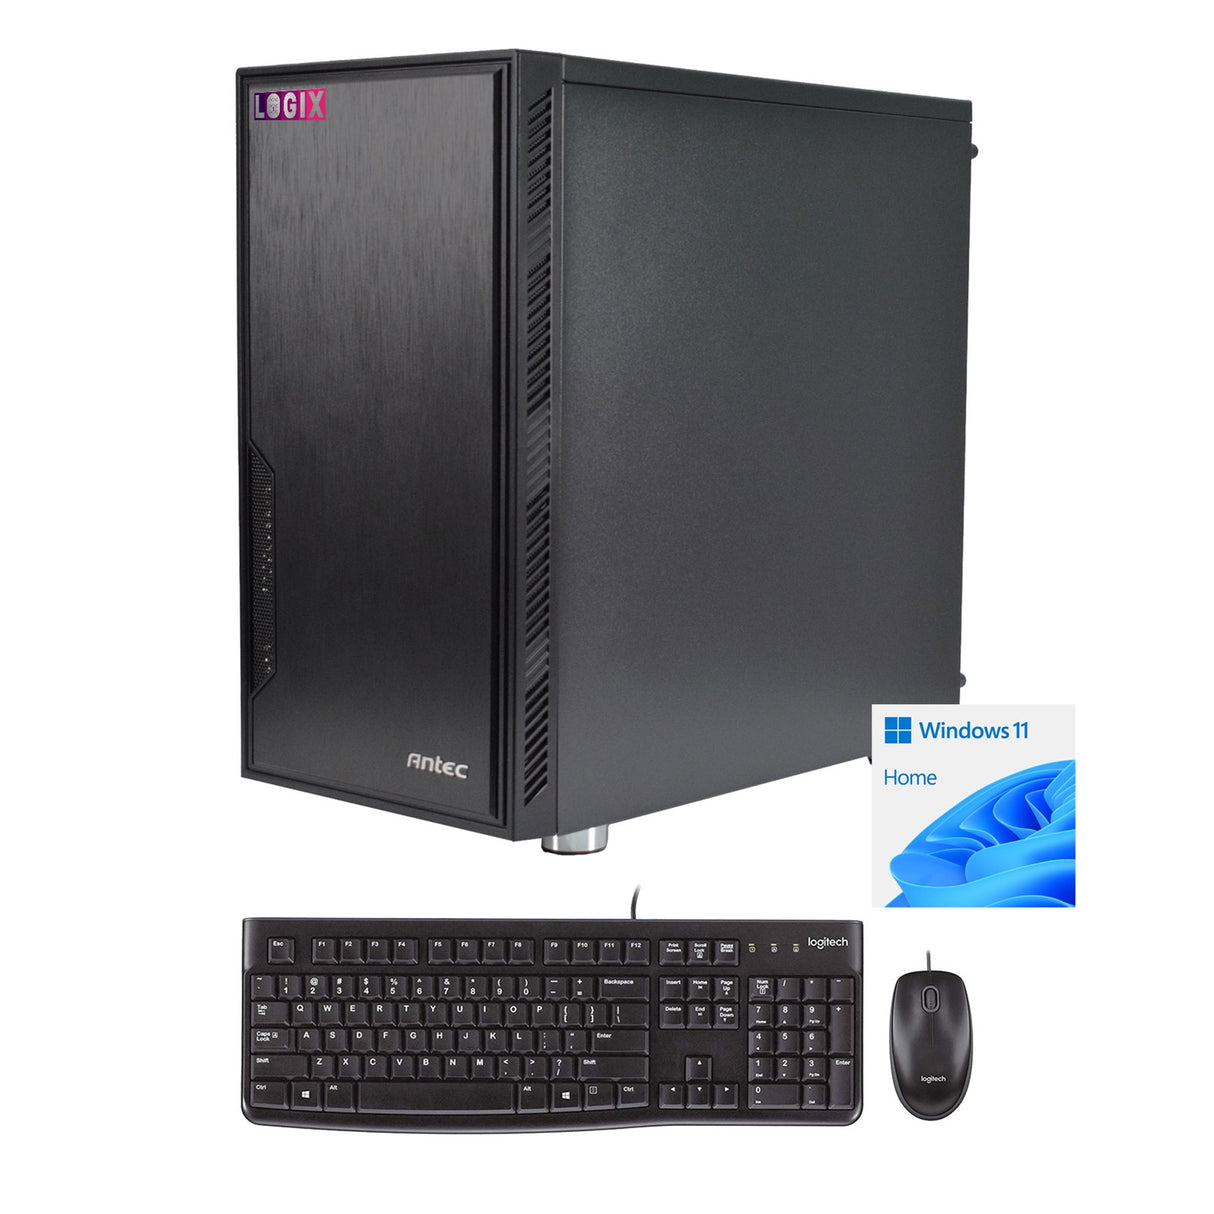 LOGIX Intel i7-12700 2.10GHz (4.90GHz Boost) 12 Core 20 threads. 16GB Kingston DDR4 RAM, 1TB Kingston NVMe M.2, 80 Cert PSU, Wi-Fi 6, Windows 11 home installed + FREE Keyboard & Mouse - Prebuilt System - Full 3-Year Parts & Collection Warranty